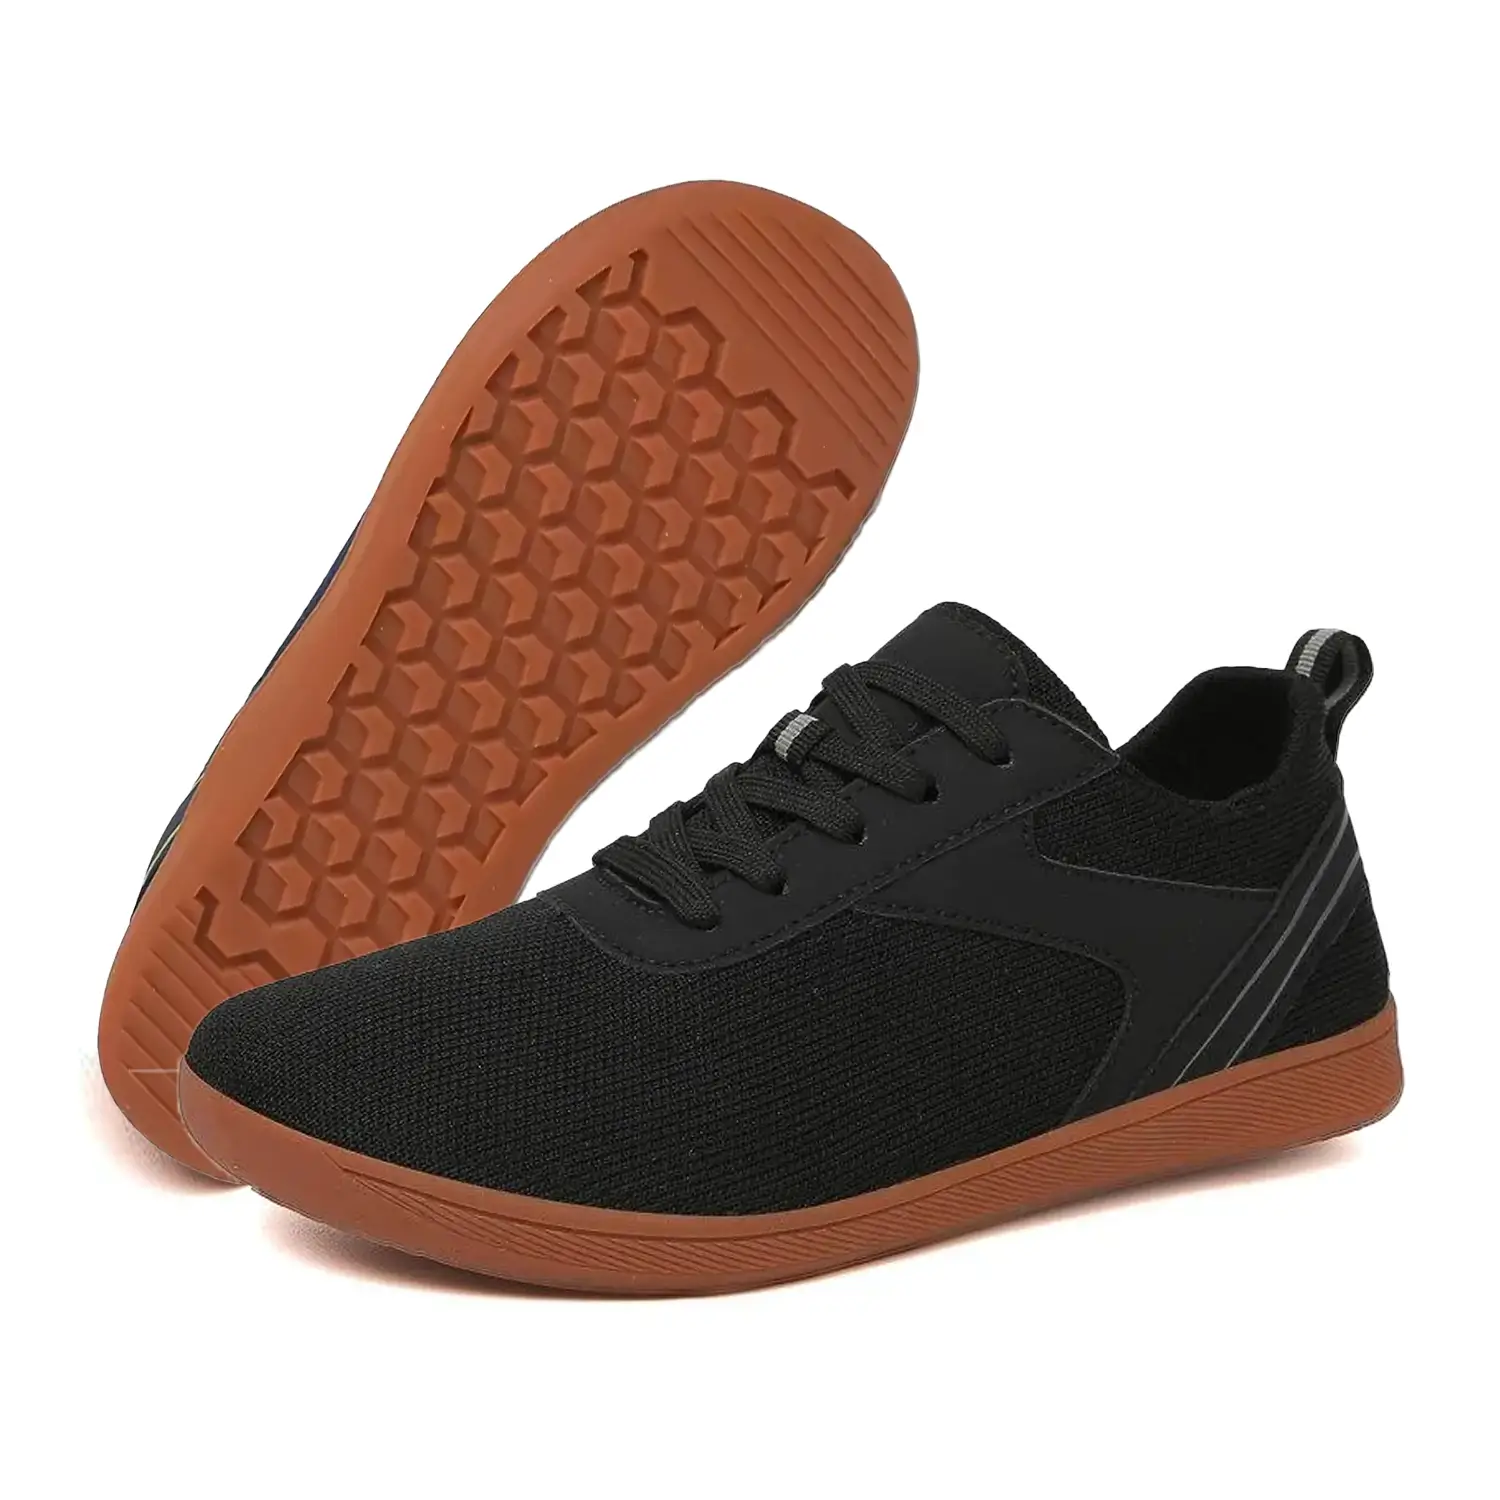 Native - Sneaker Barefoot Shoes (Unisex)